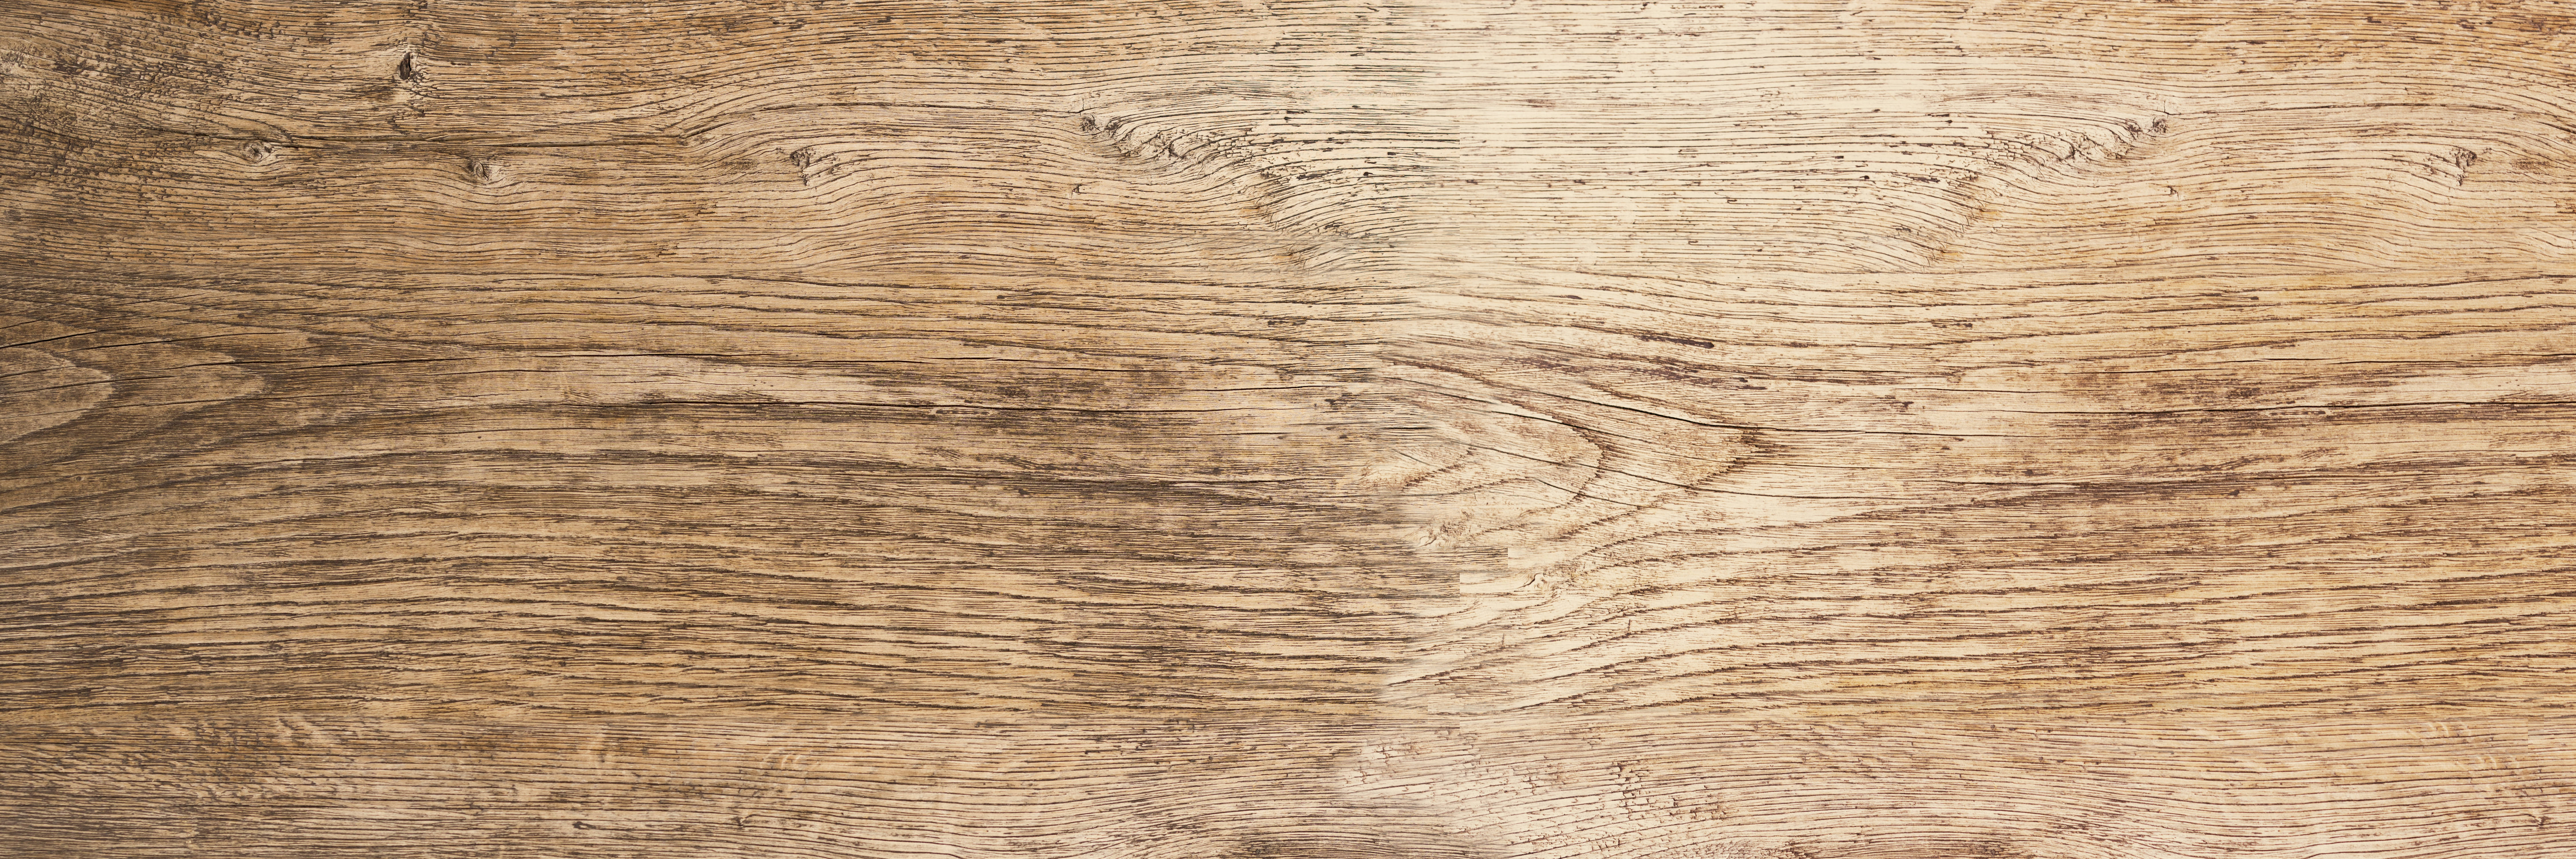 9000X3000 Wood Wallpaper and Background